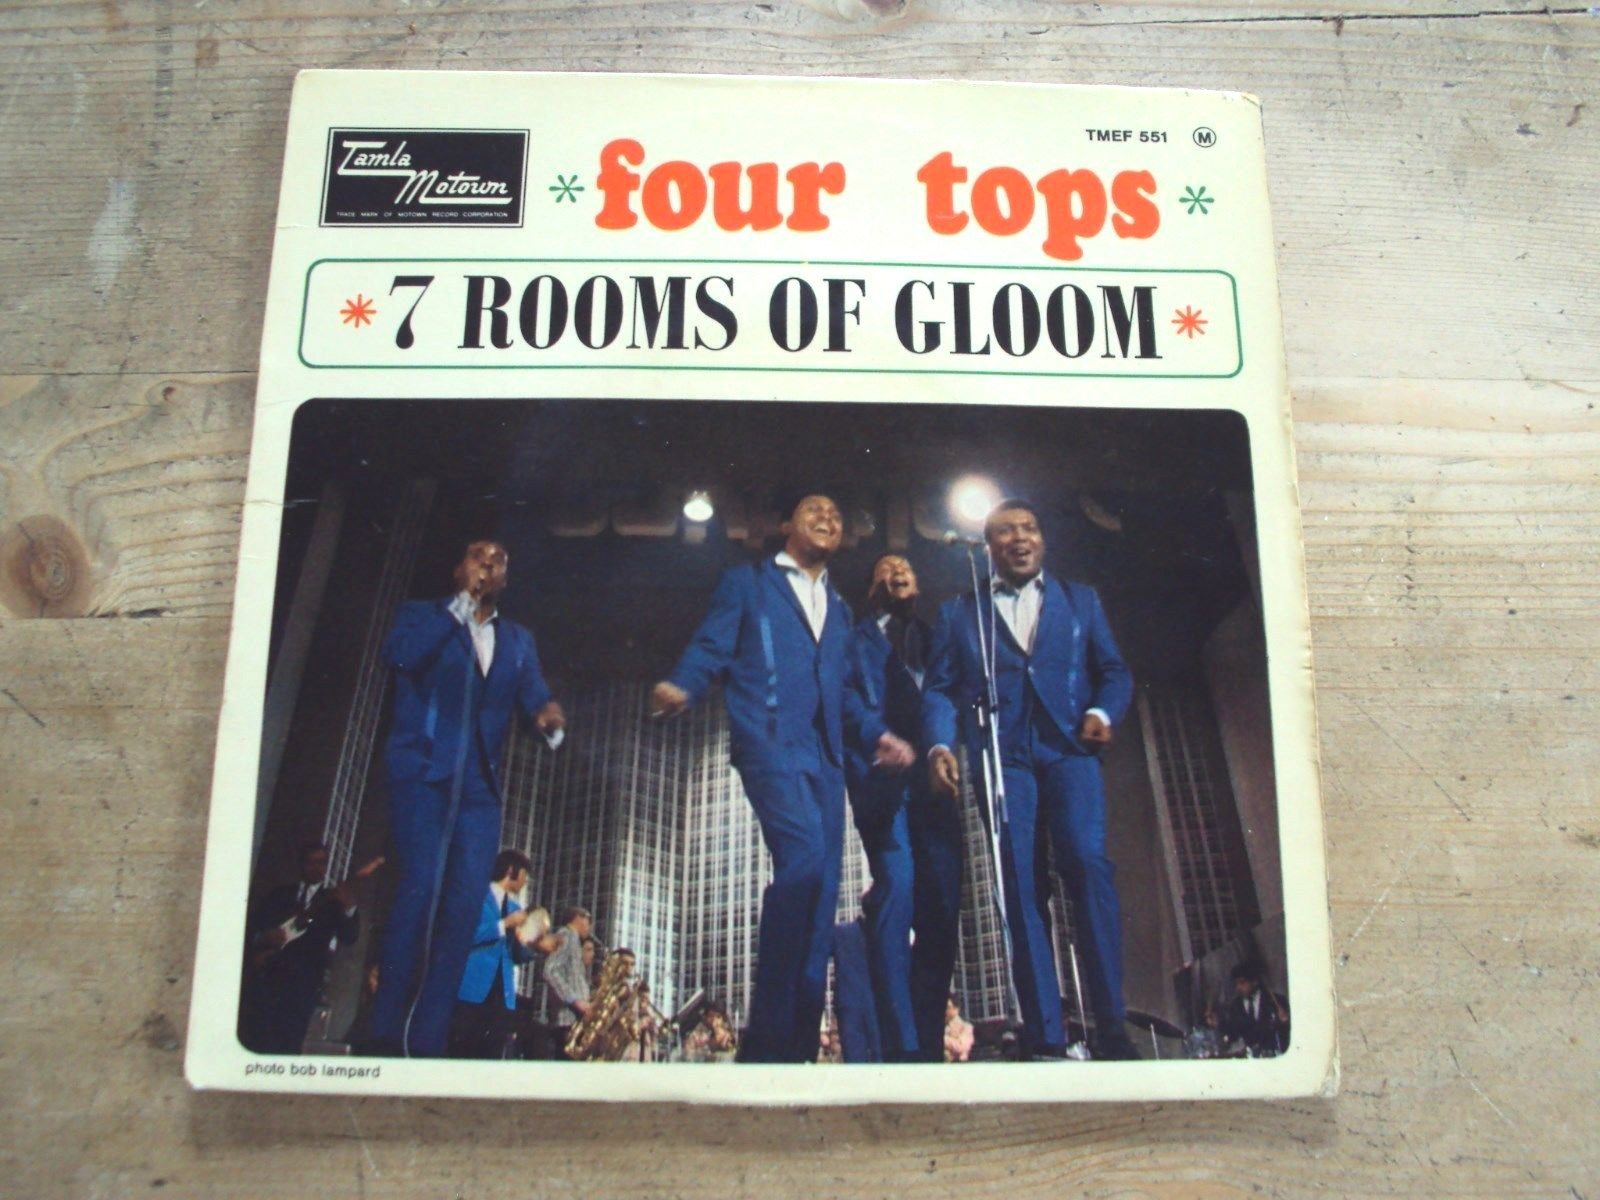 FOUR TOPS - 7 ROOMS OF GLOOM 7" EP Northern Soul Tamla Motown TMEF 551 LOVELY